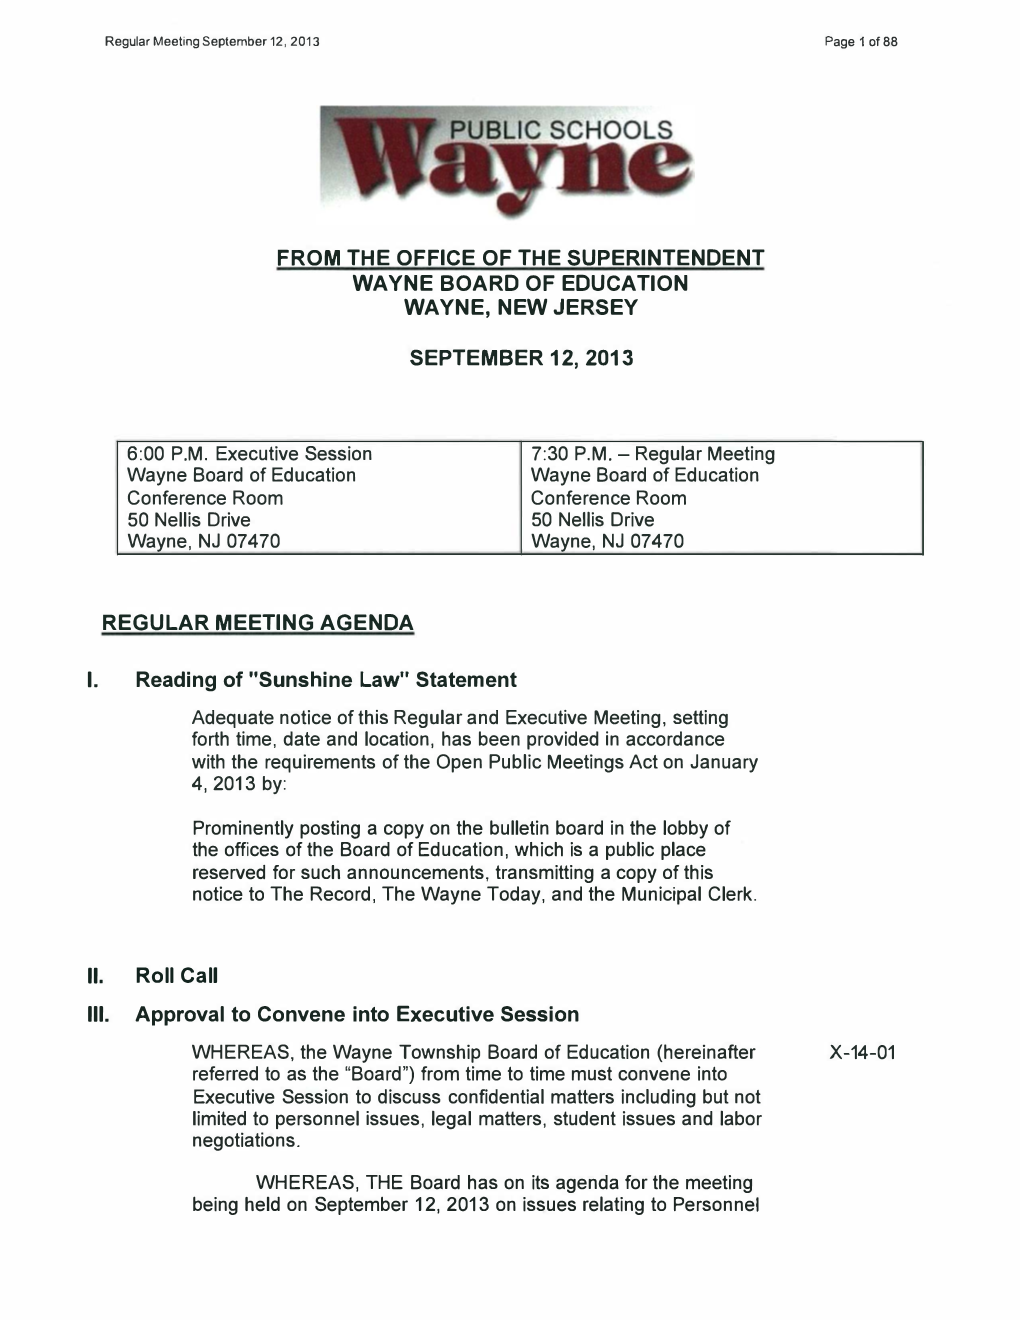 From the Office of the Superintendent Wayne Board of Education Wayne, New Jersey